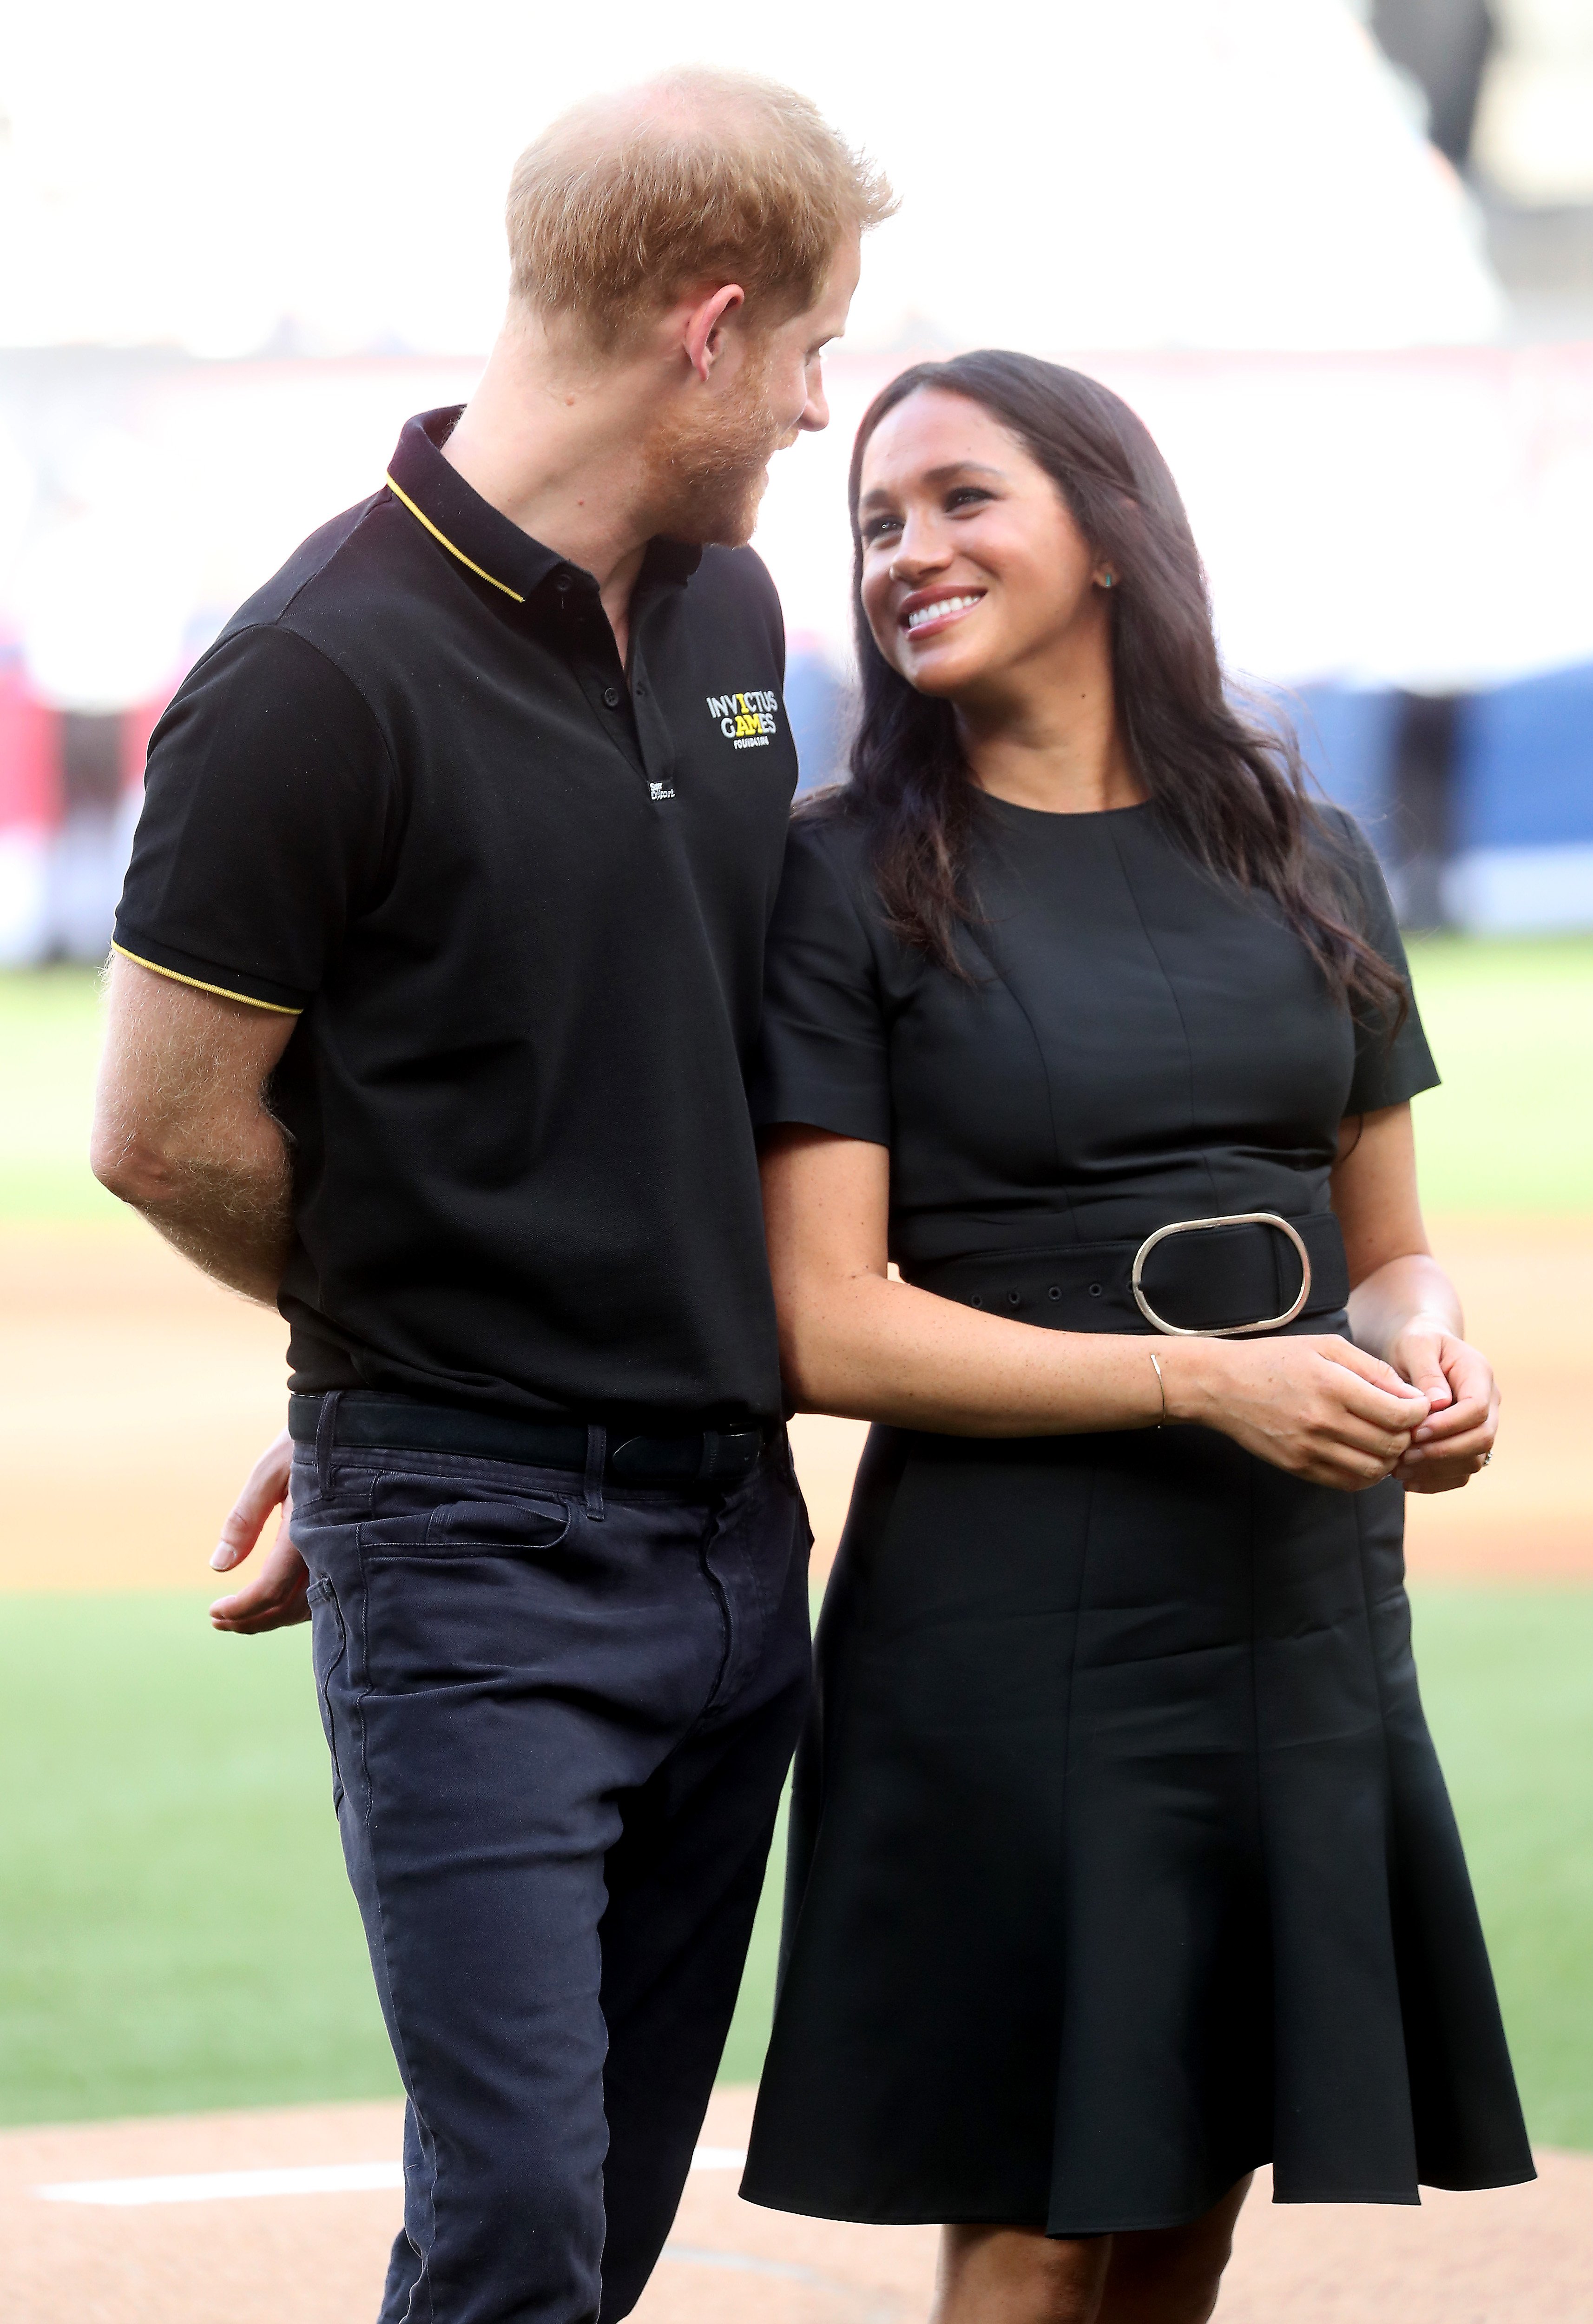 Prince Harry and Meghan Markle at the London Stadium on June 29, 2019, in London, England. | Source: Getty Images.